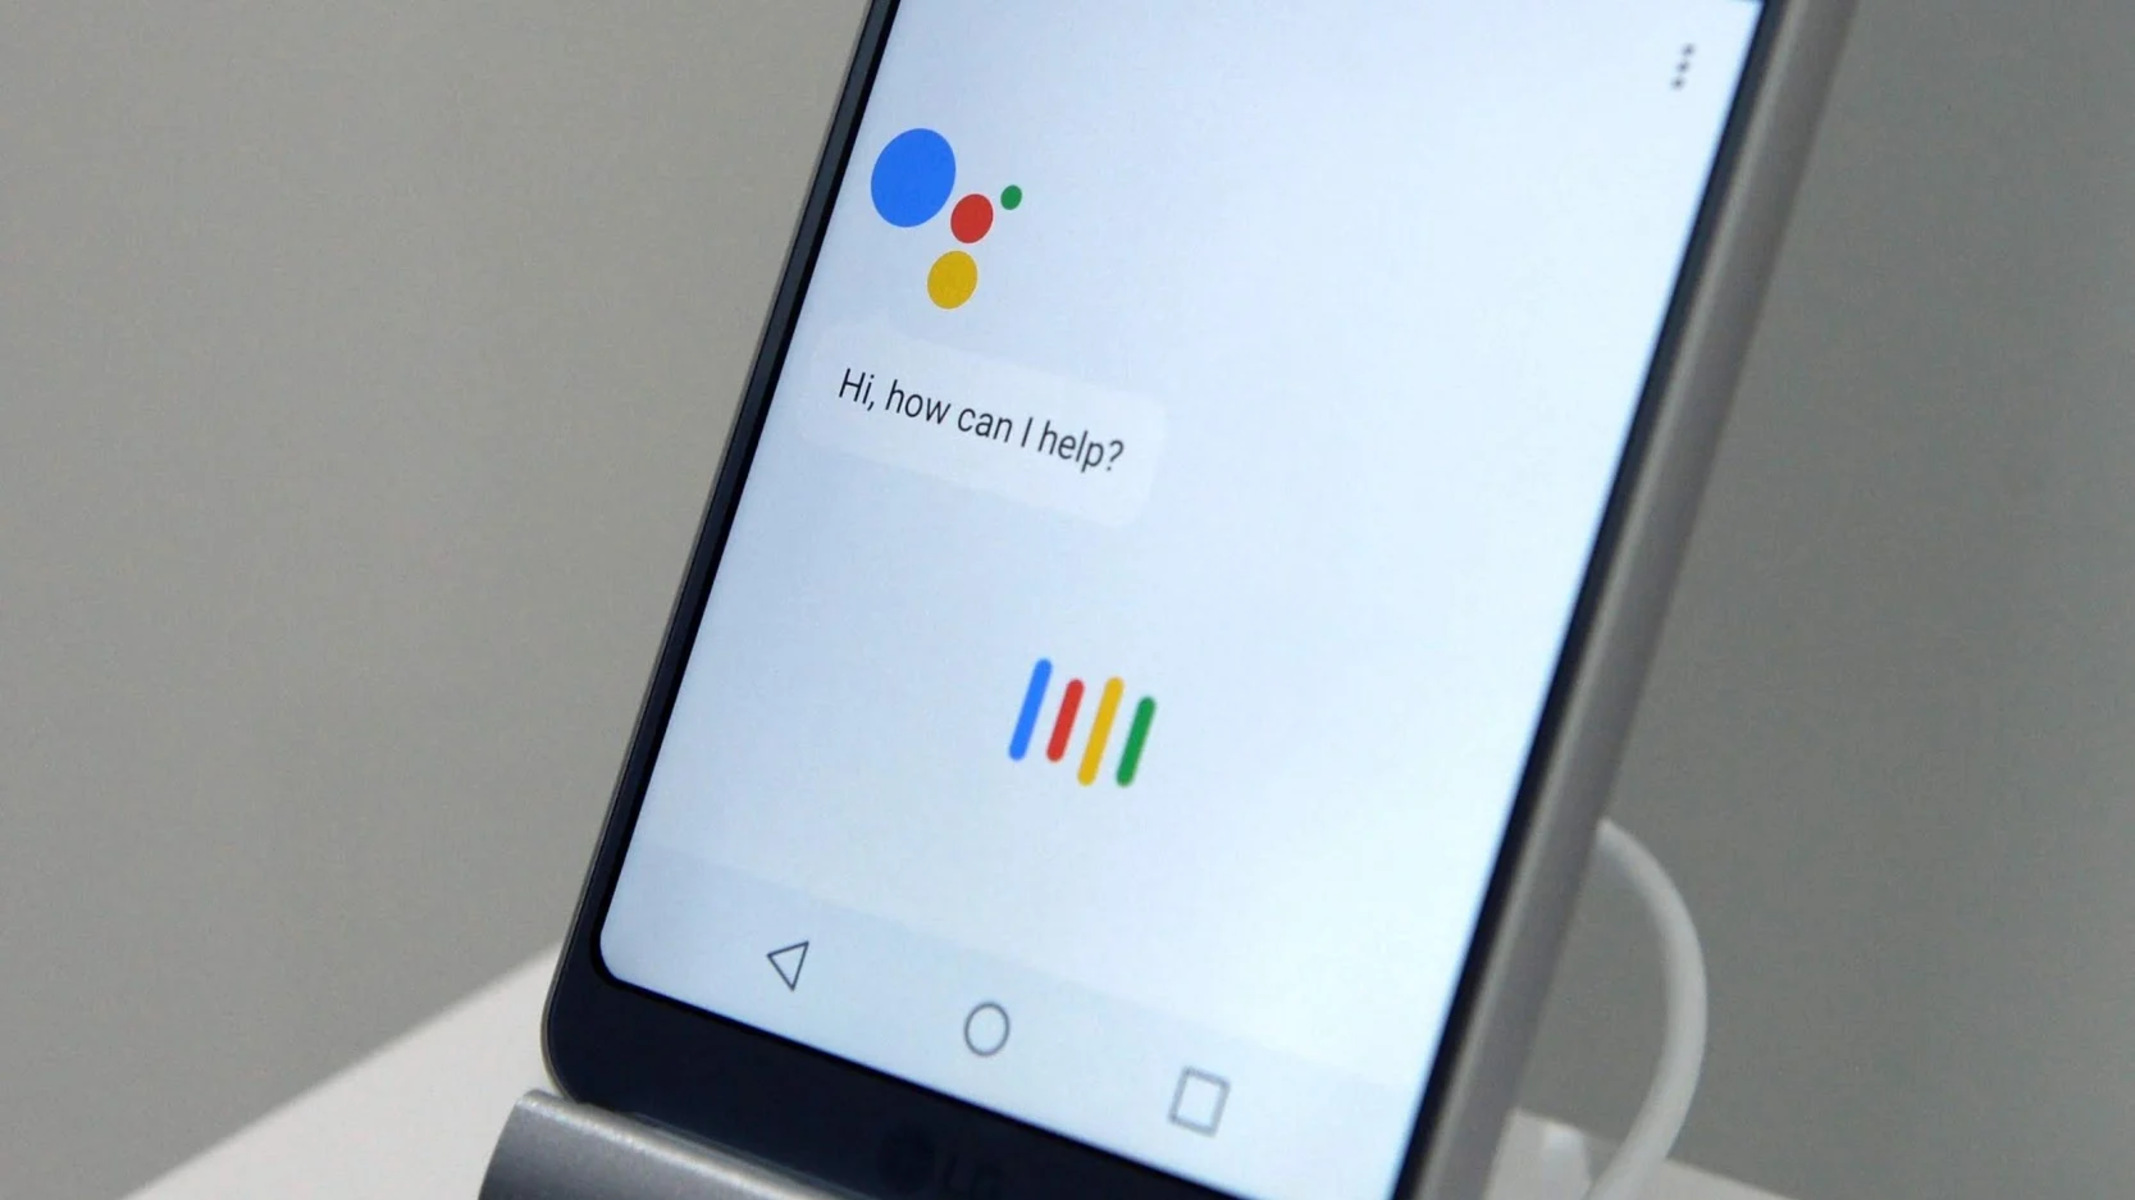 Disabling Voice Assistant On Google Pixel 4: Step-by-Step Guide